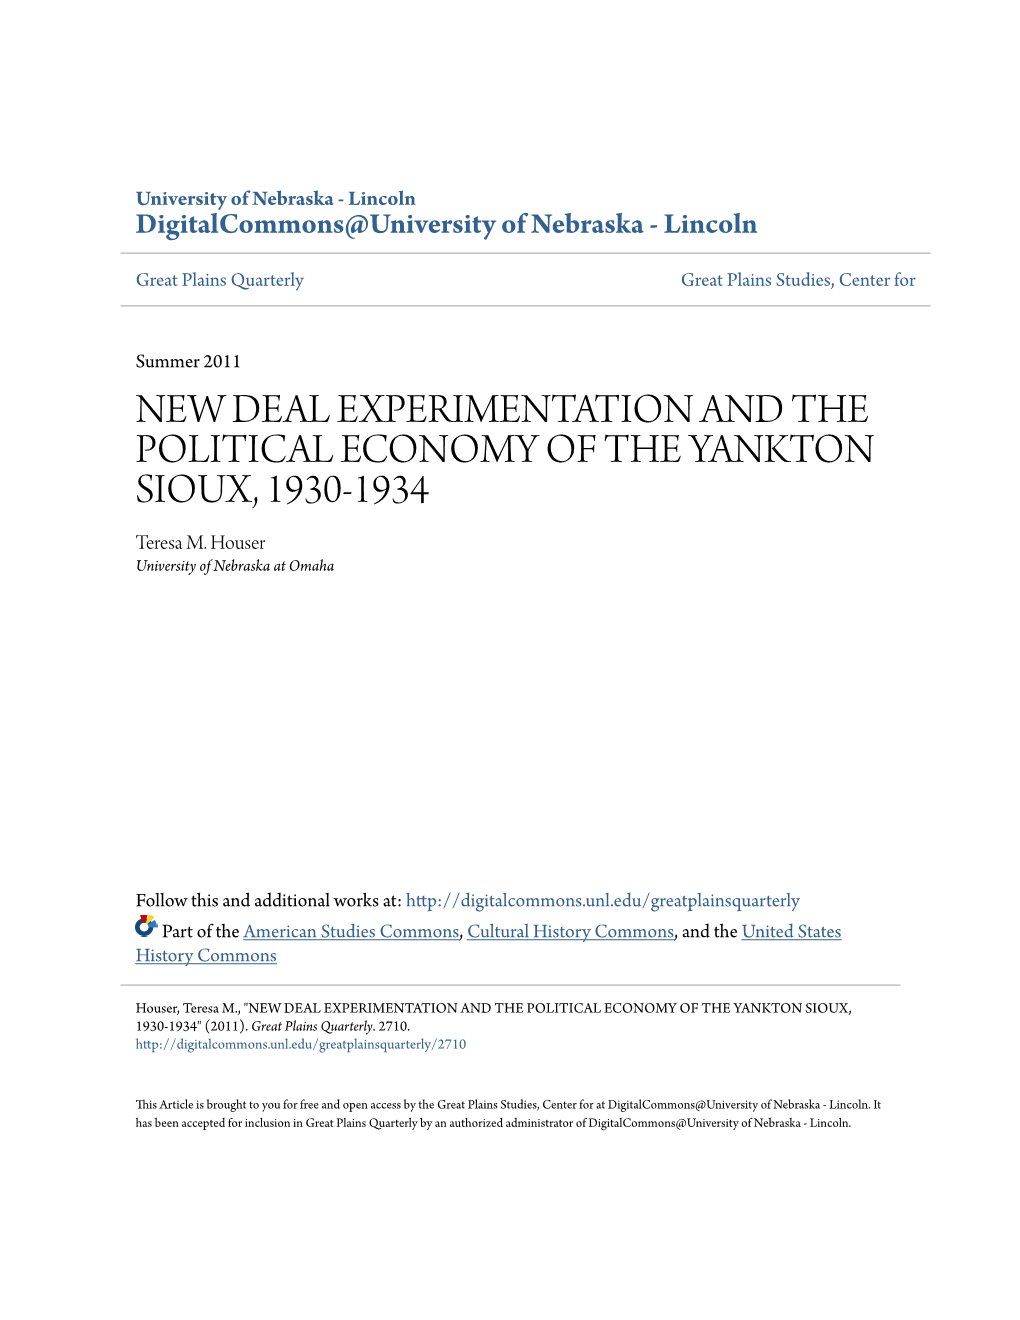 NEW DEAL EXPERIMENTATION and the POLITICAL ECONOMY of the YANKTON SIOUX, 1930-1934 Teresa M